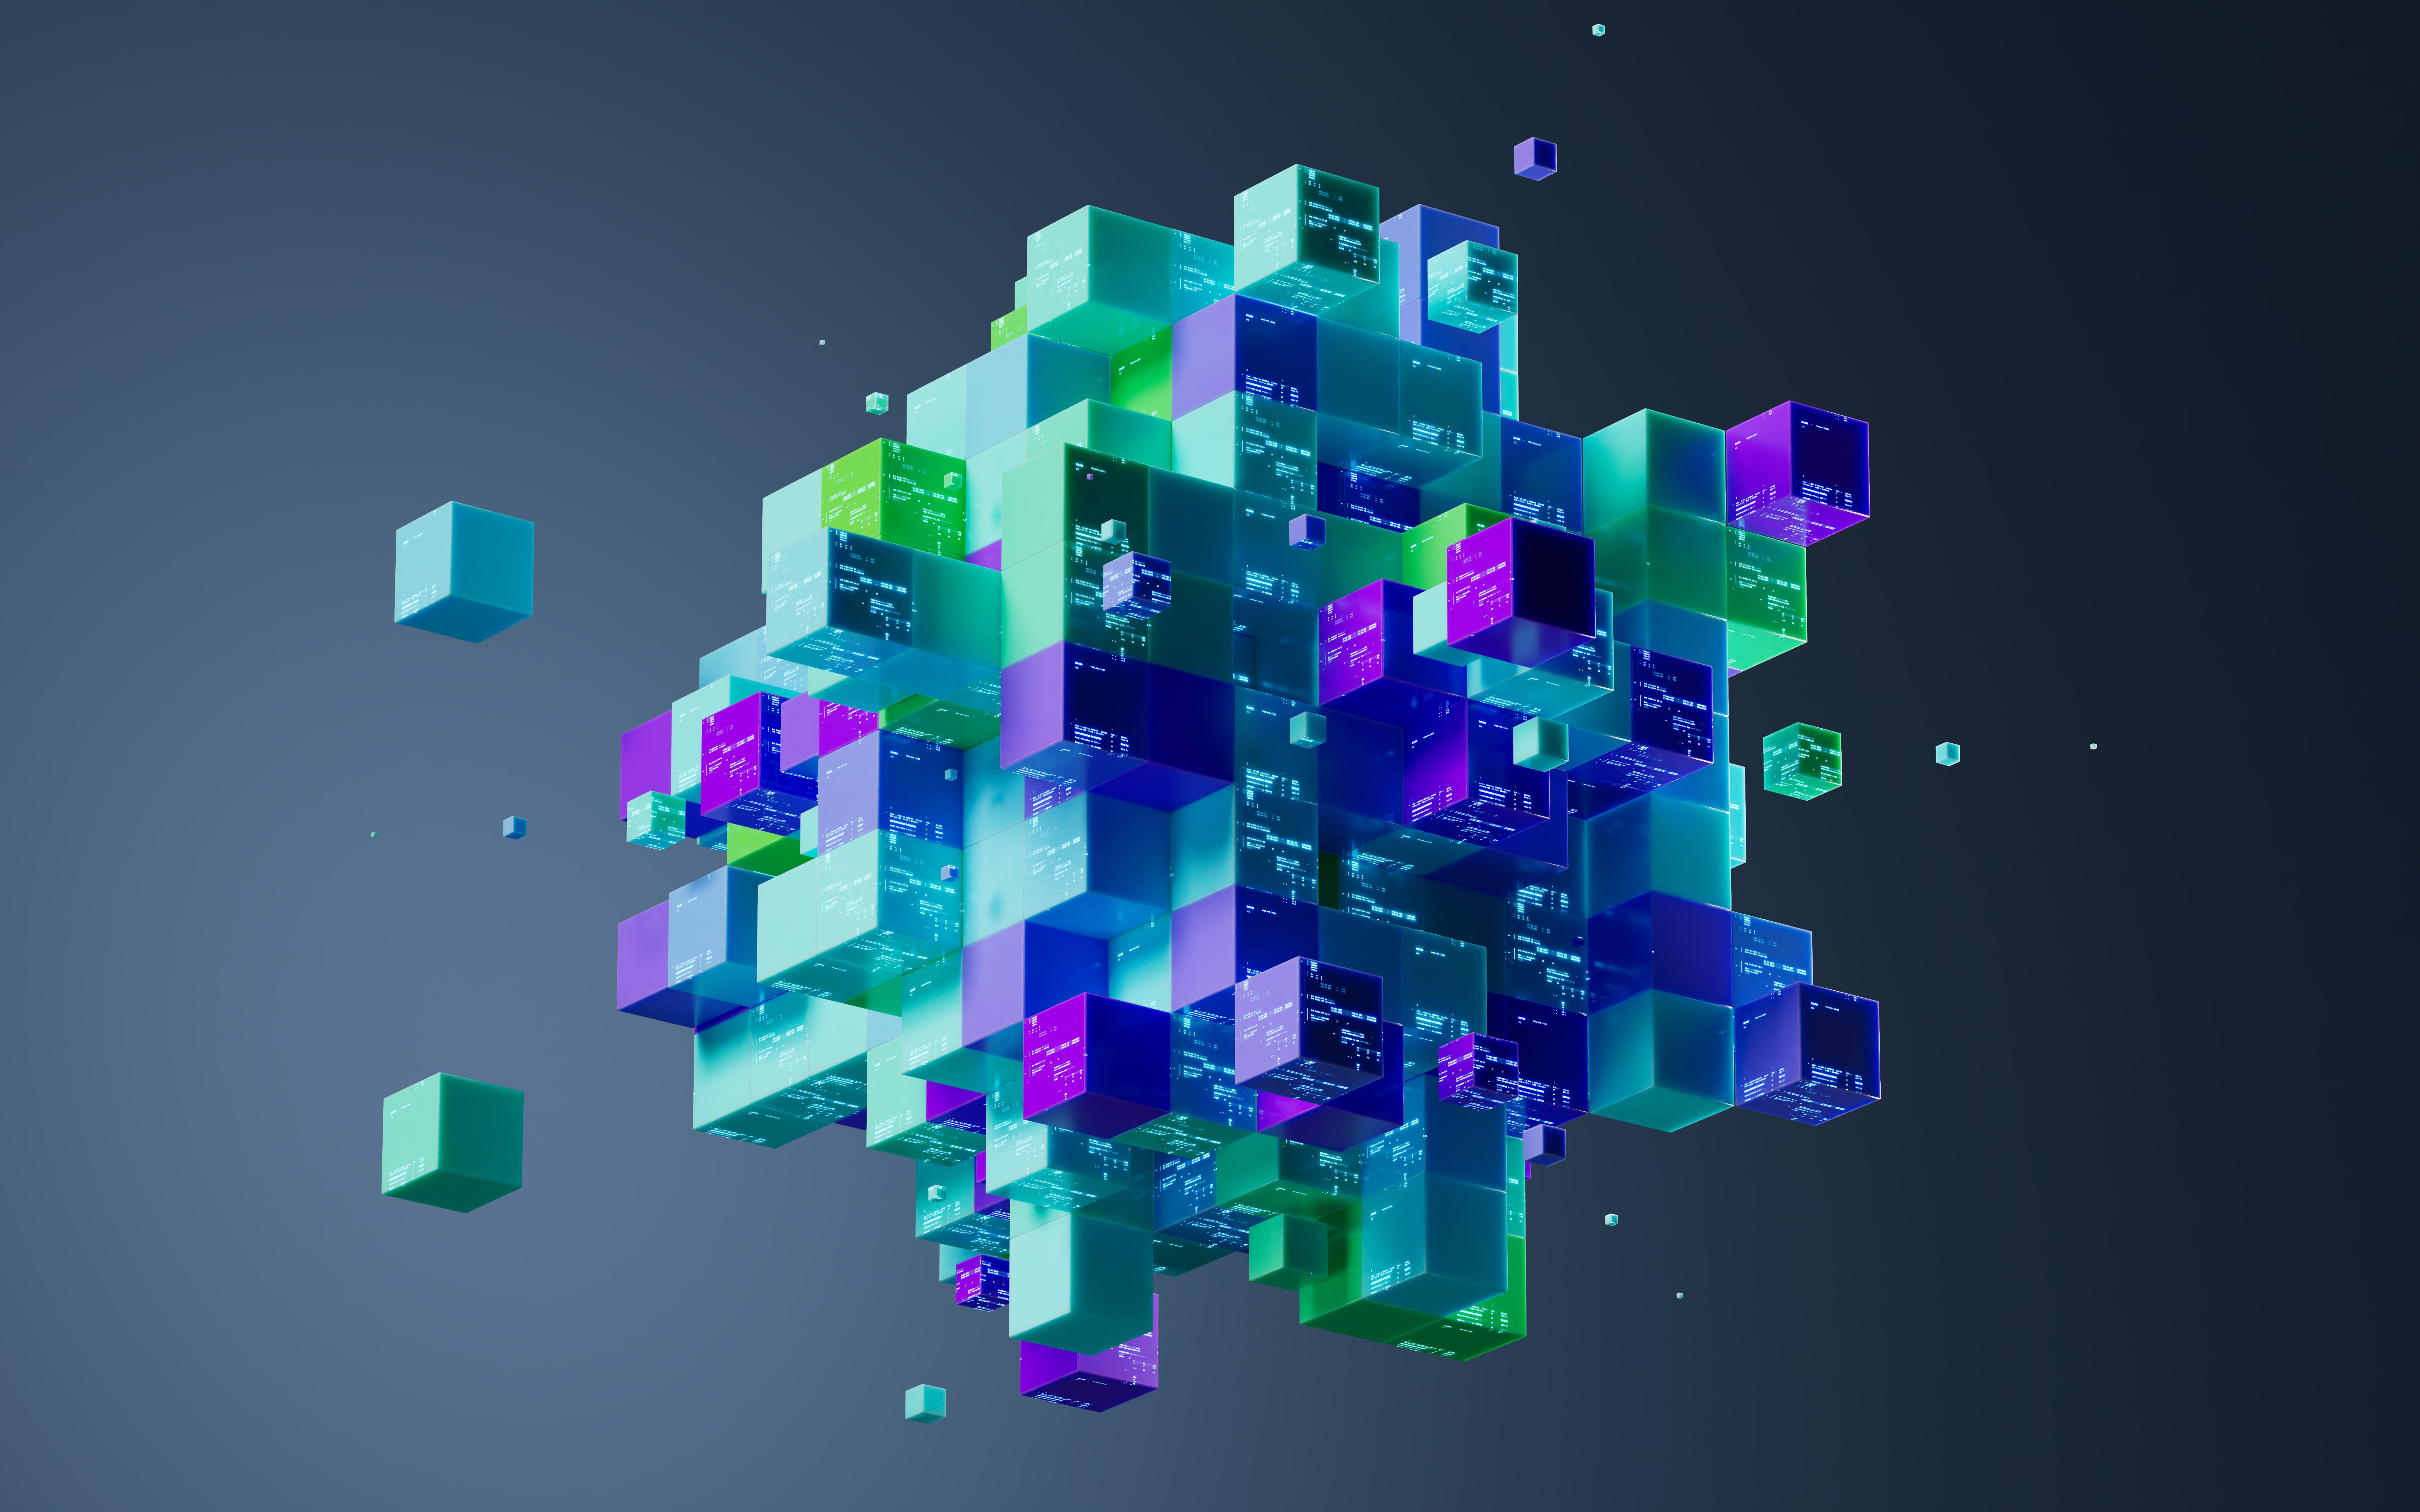 Green, blue and purple dismantled cubes reassembled floating on dark blue background.